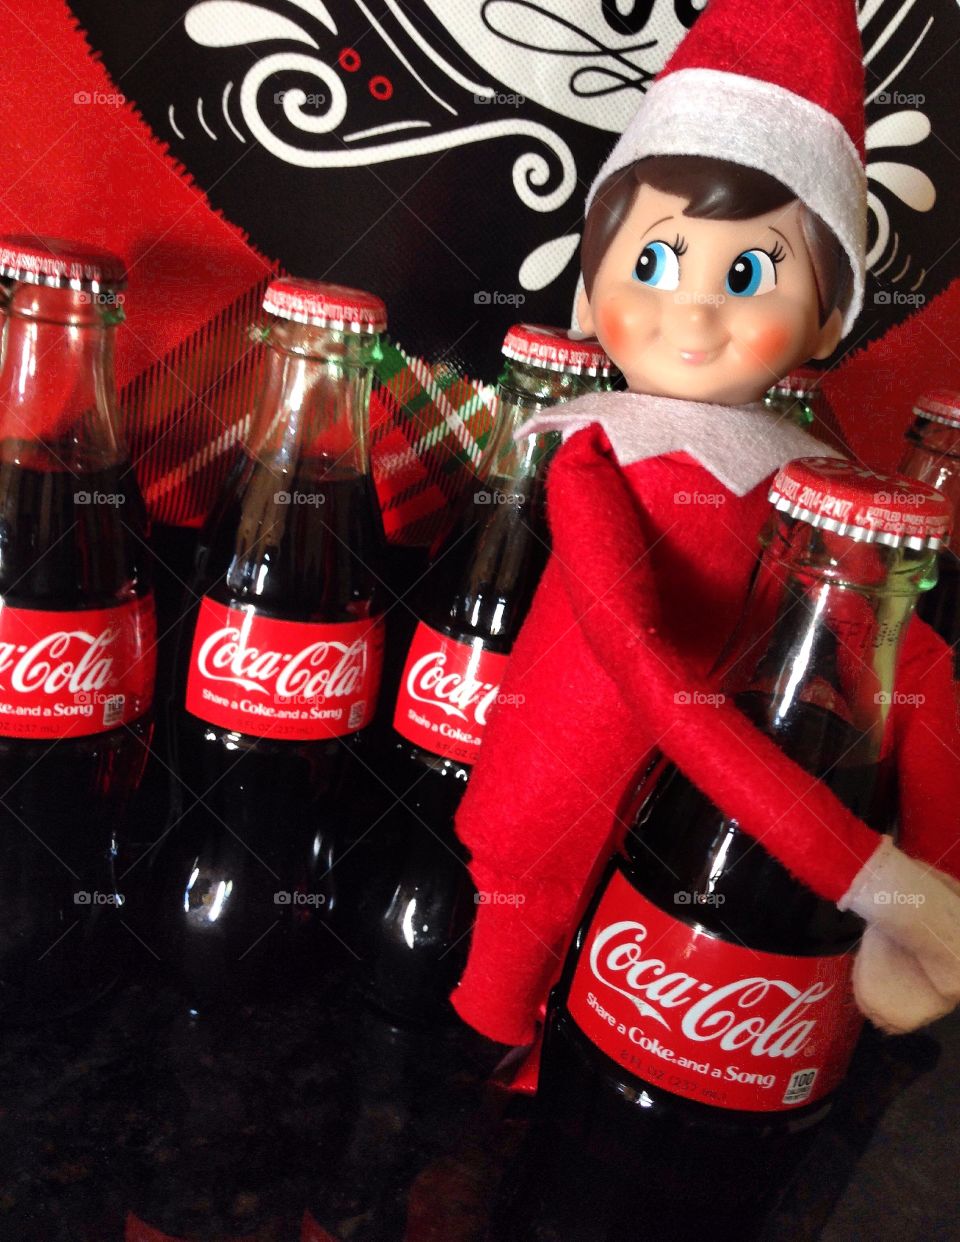 The Elf on the Shelf loves Coca-Cola!